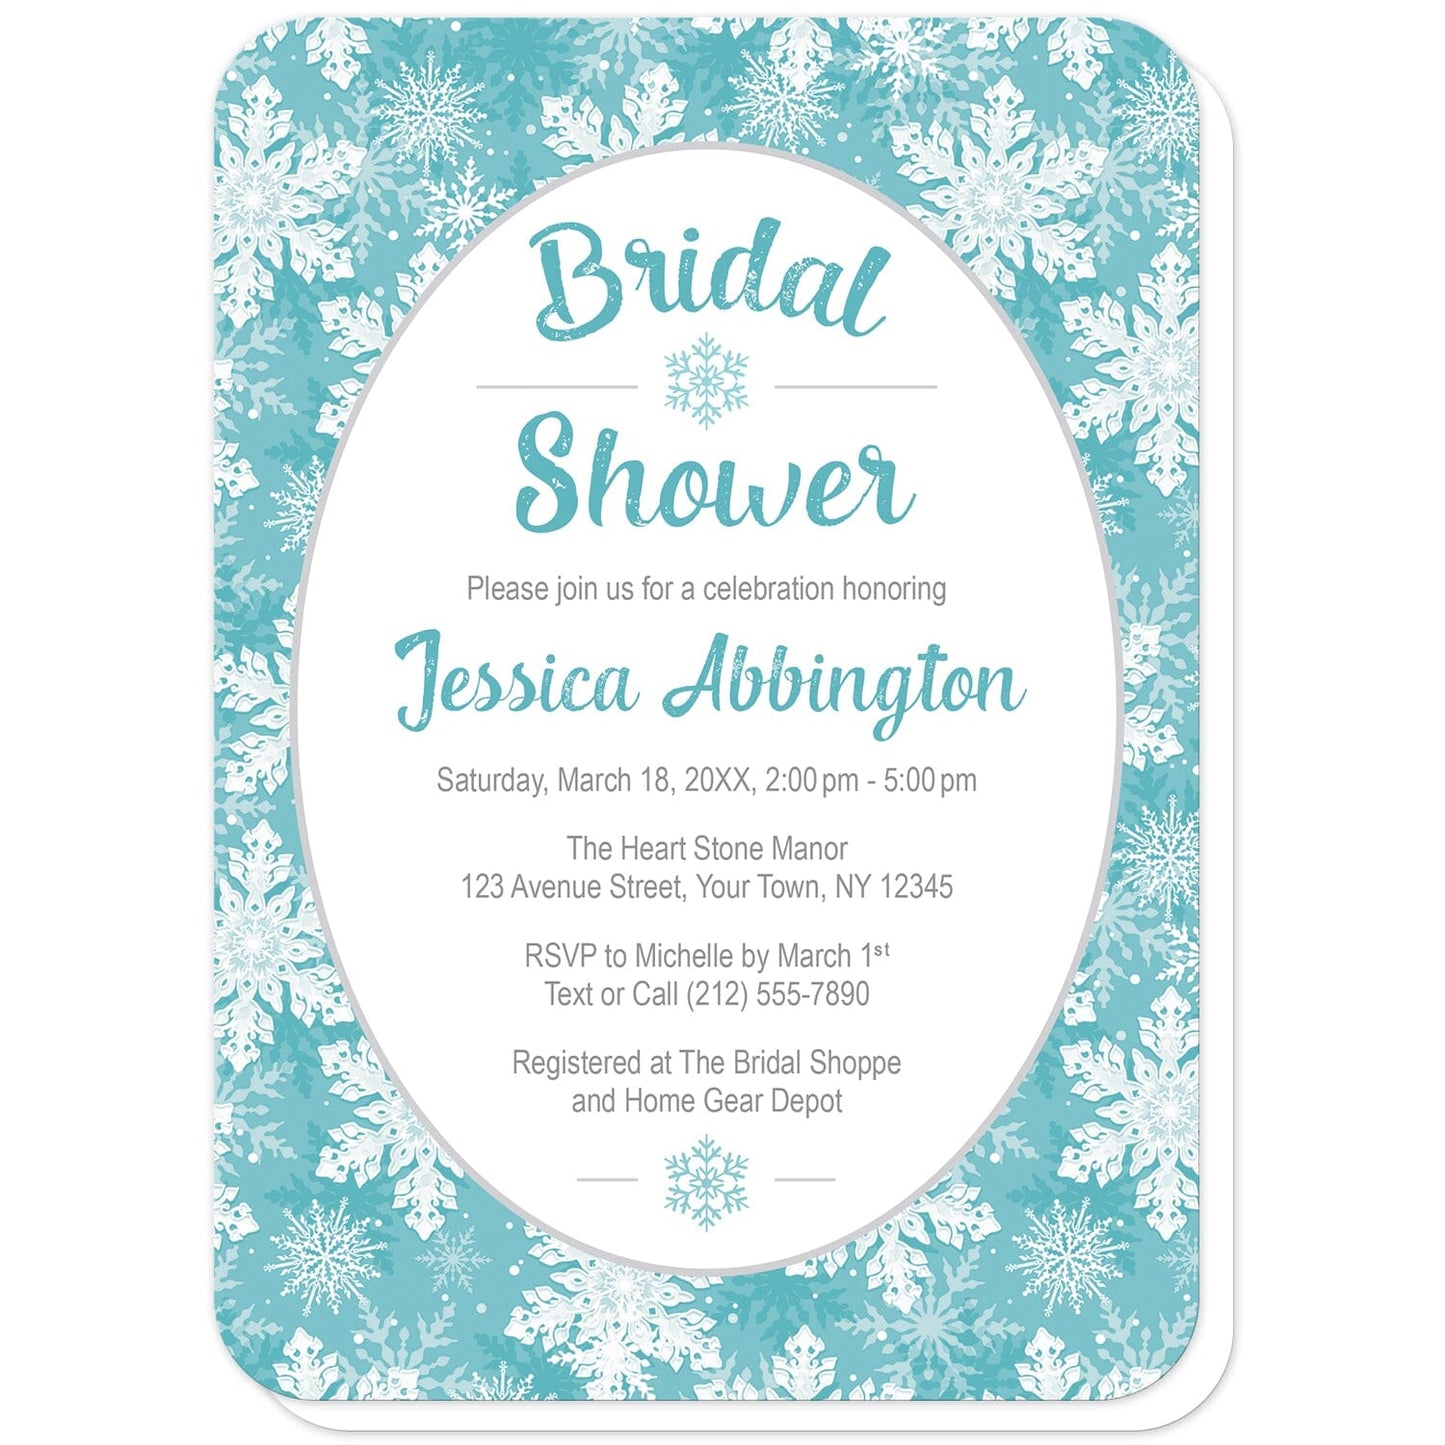 Teal Snowflake Bridal Shower Invitations (with rounded corners) at Artistically Invited. Beautifully ornate teal snowflake bridal shower invitations designed with your personalized celebration details custom printed in teal and gray in a white oval frame design over a teal, turquoise, and white snowflake pattern background.